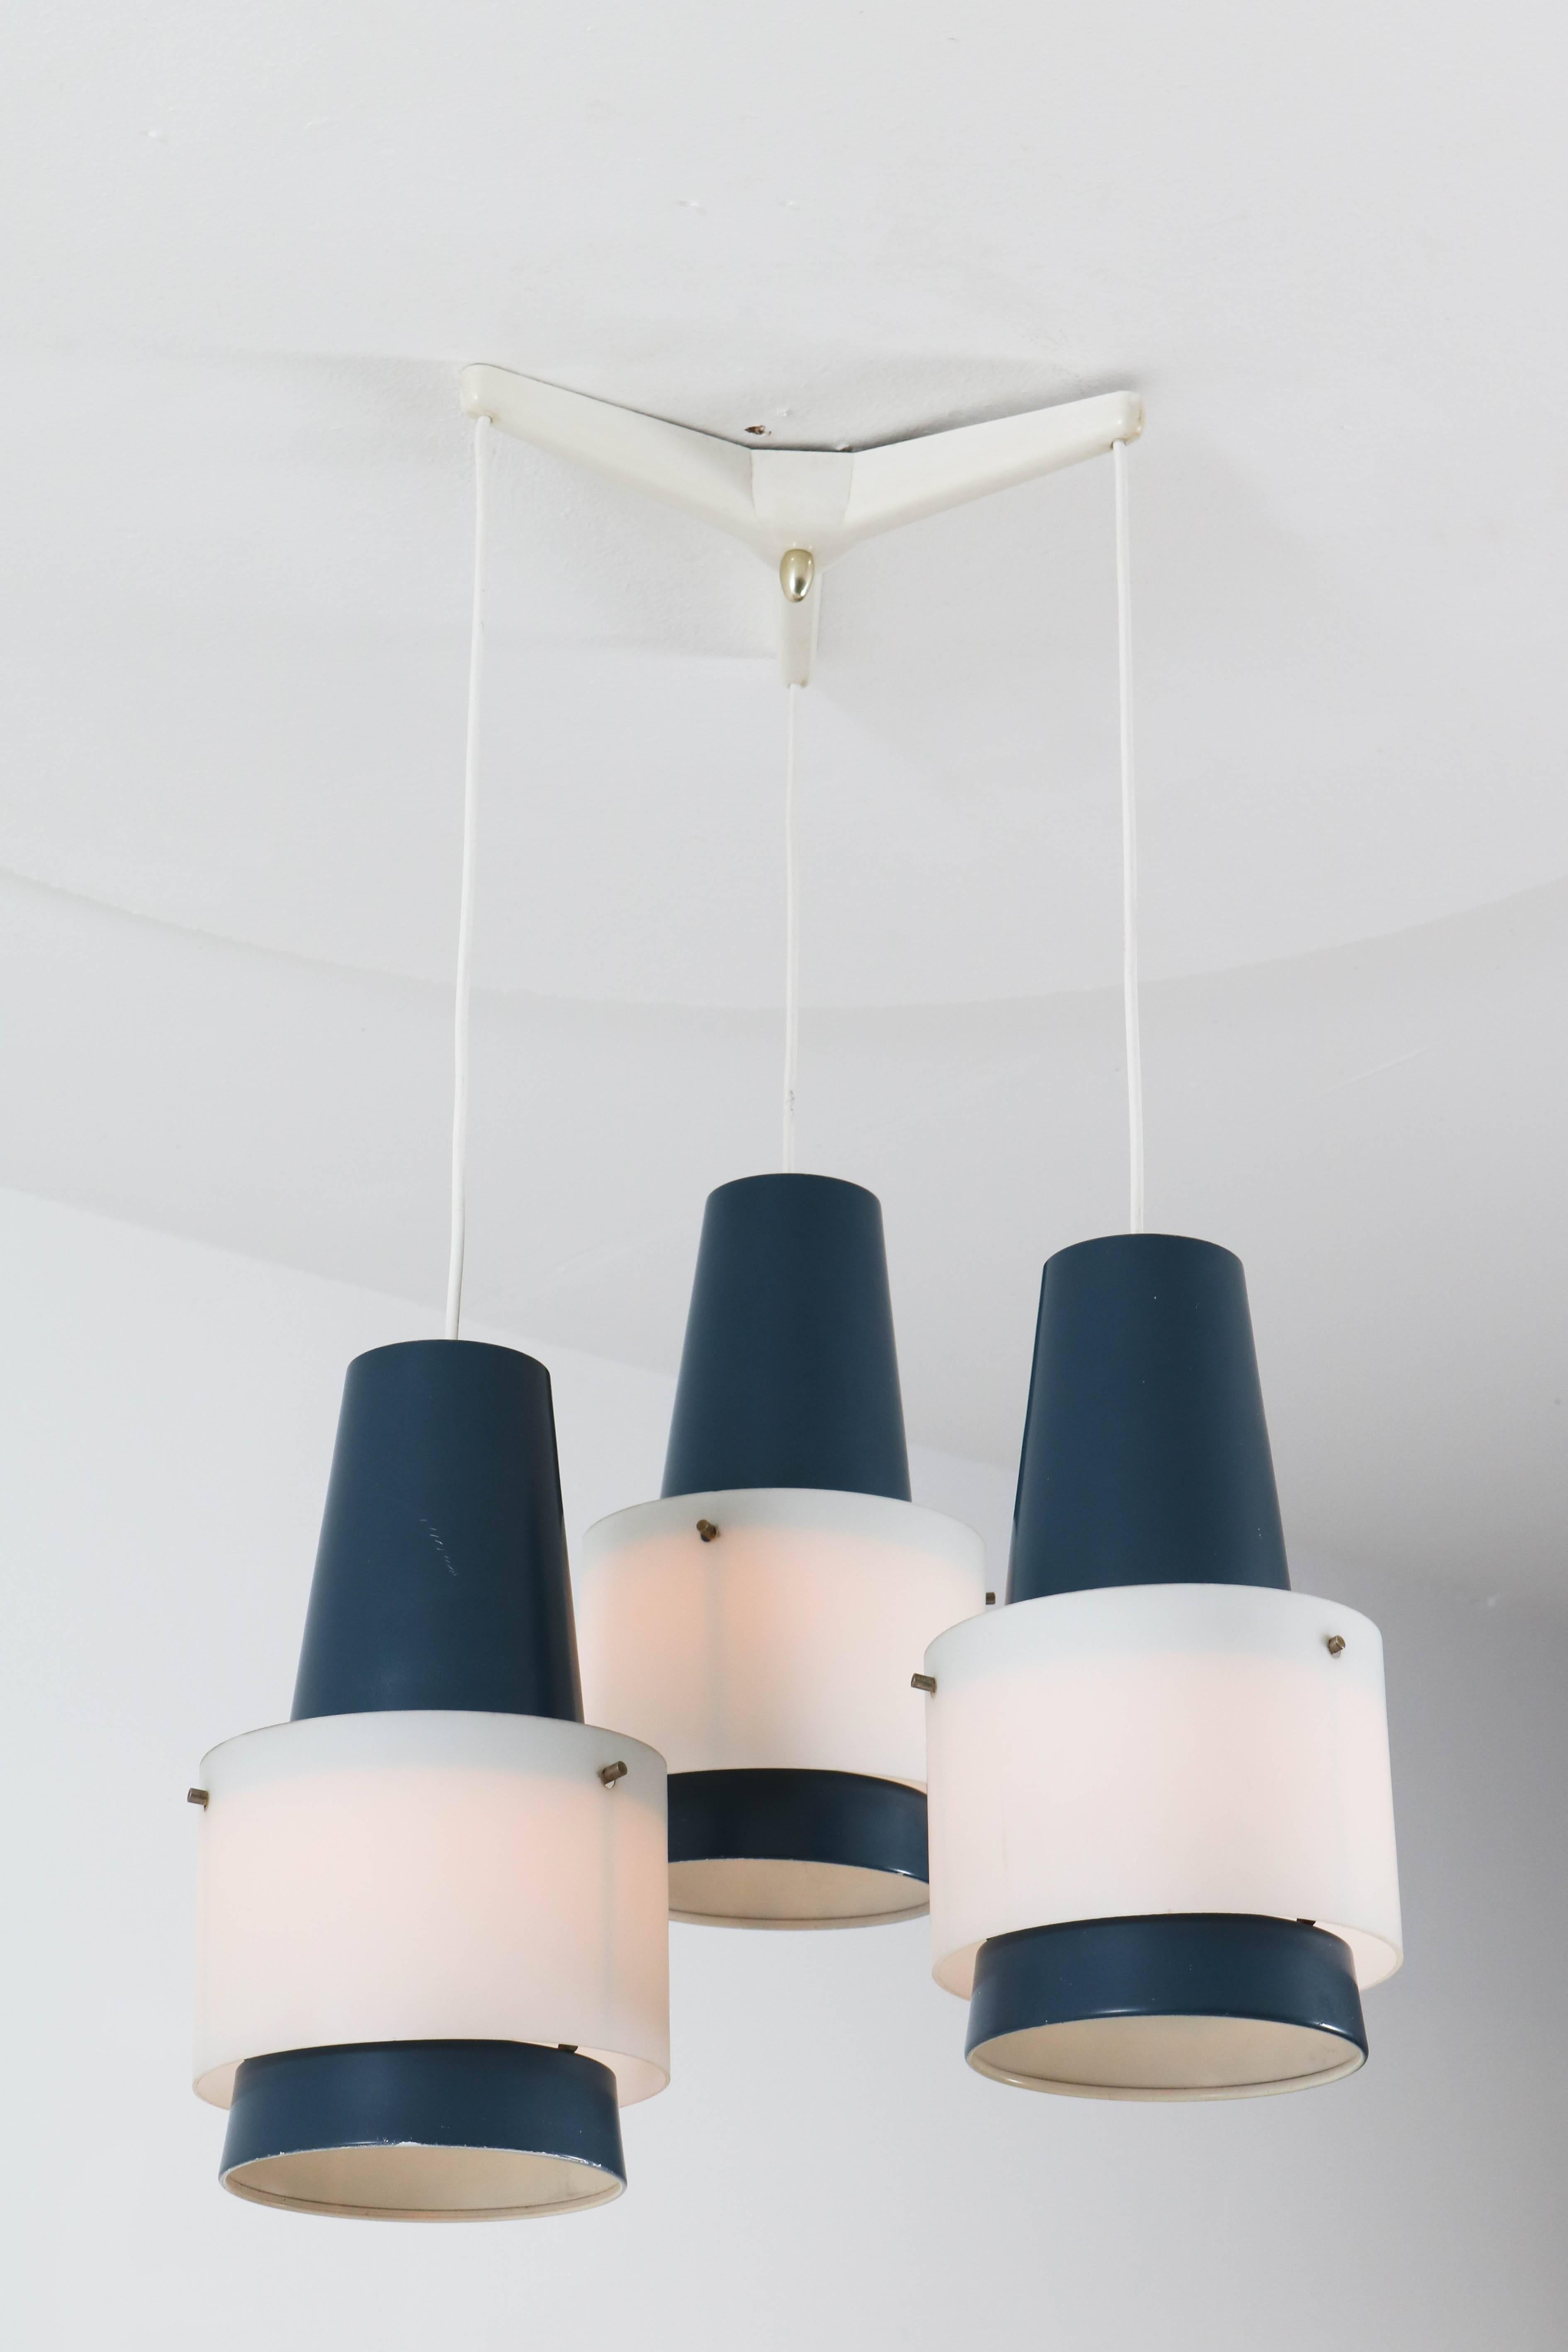 Rare Mid-Century Modern pendant lamp model NTK 28 E/00 by Louis Kalff for Philips, 1950s.
Blue lacquered metal and milky glass shades.
Original plastic ceiling support.
In good original condition with minor wear, one milky glass shade has a tiny